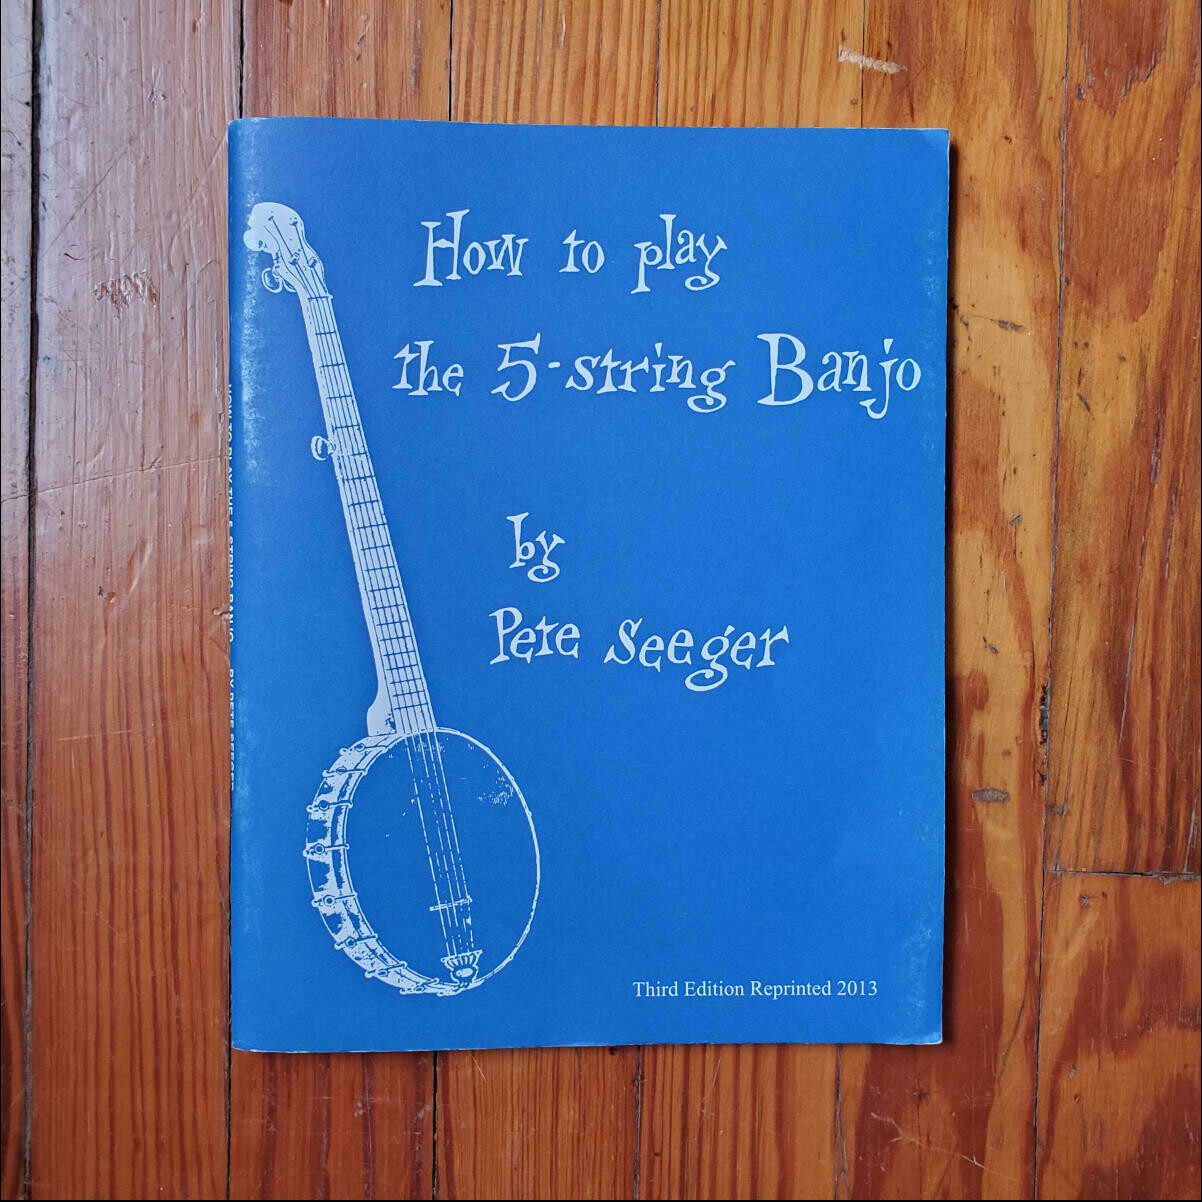 HL How to Play the 5-String Banjo by: Pete Seeger